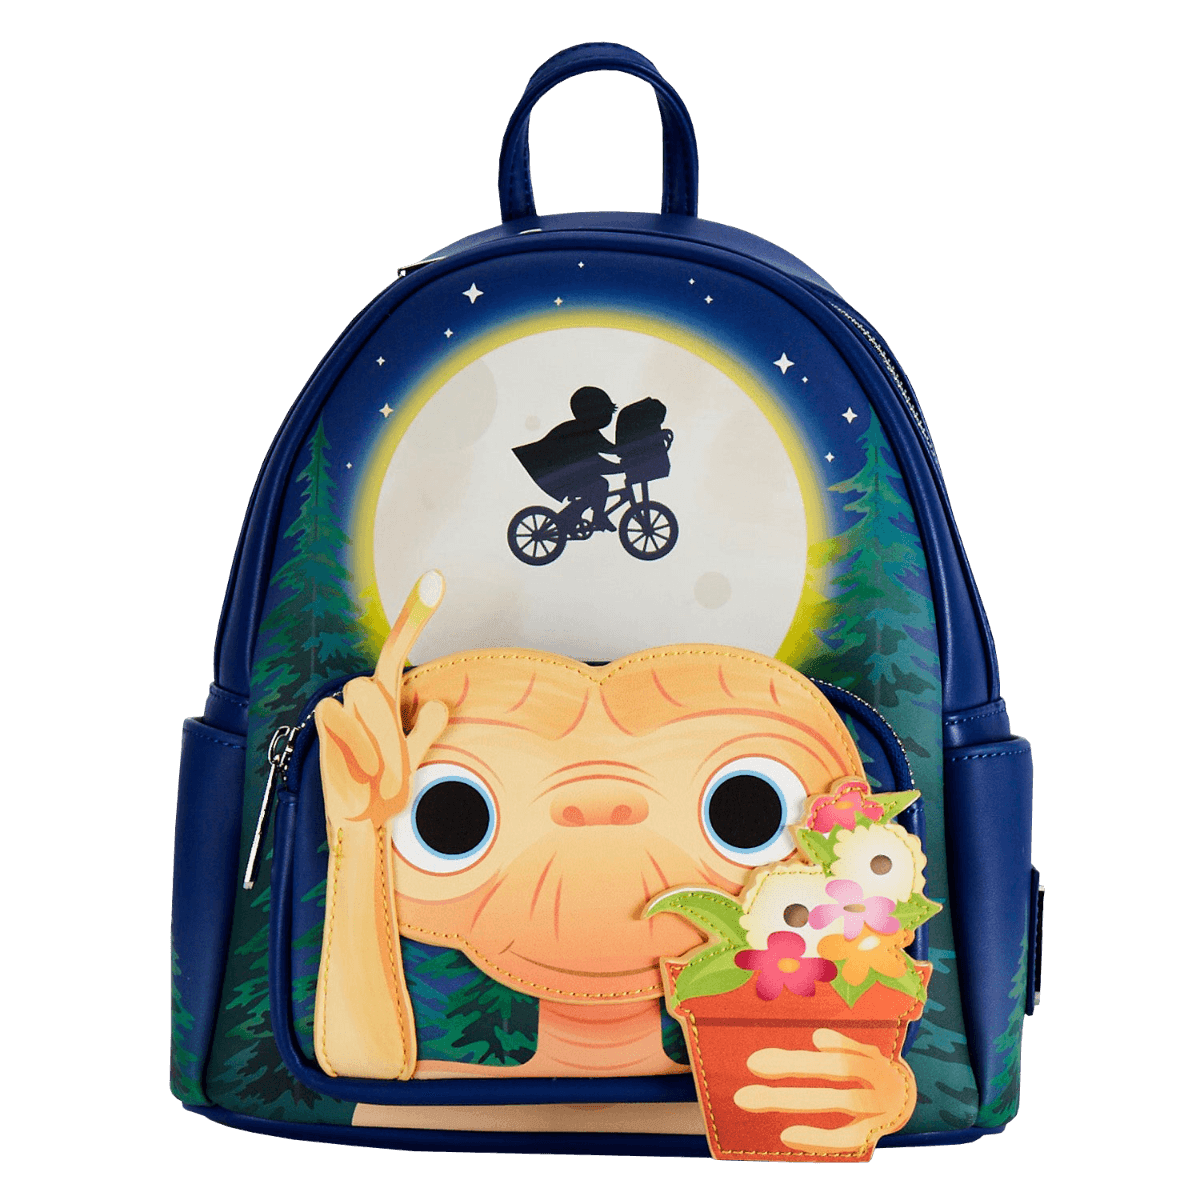 LOUETBK0001 E.T. the Extraterrestrial - Ill Be Right Here Mini Backpack - Loungefly - Titan Pop Culture